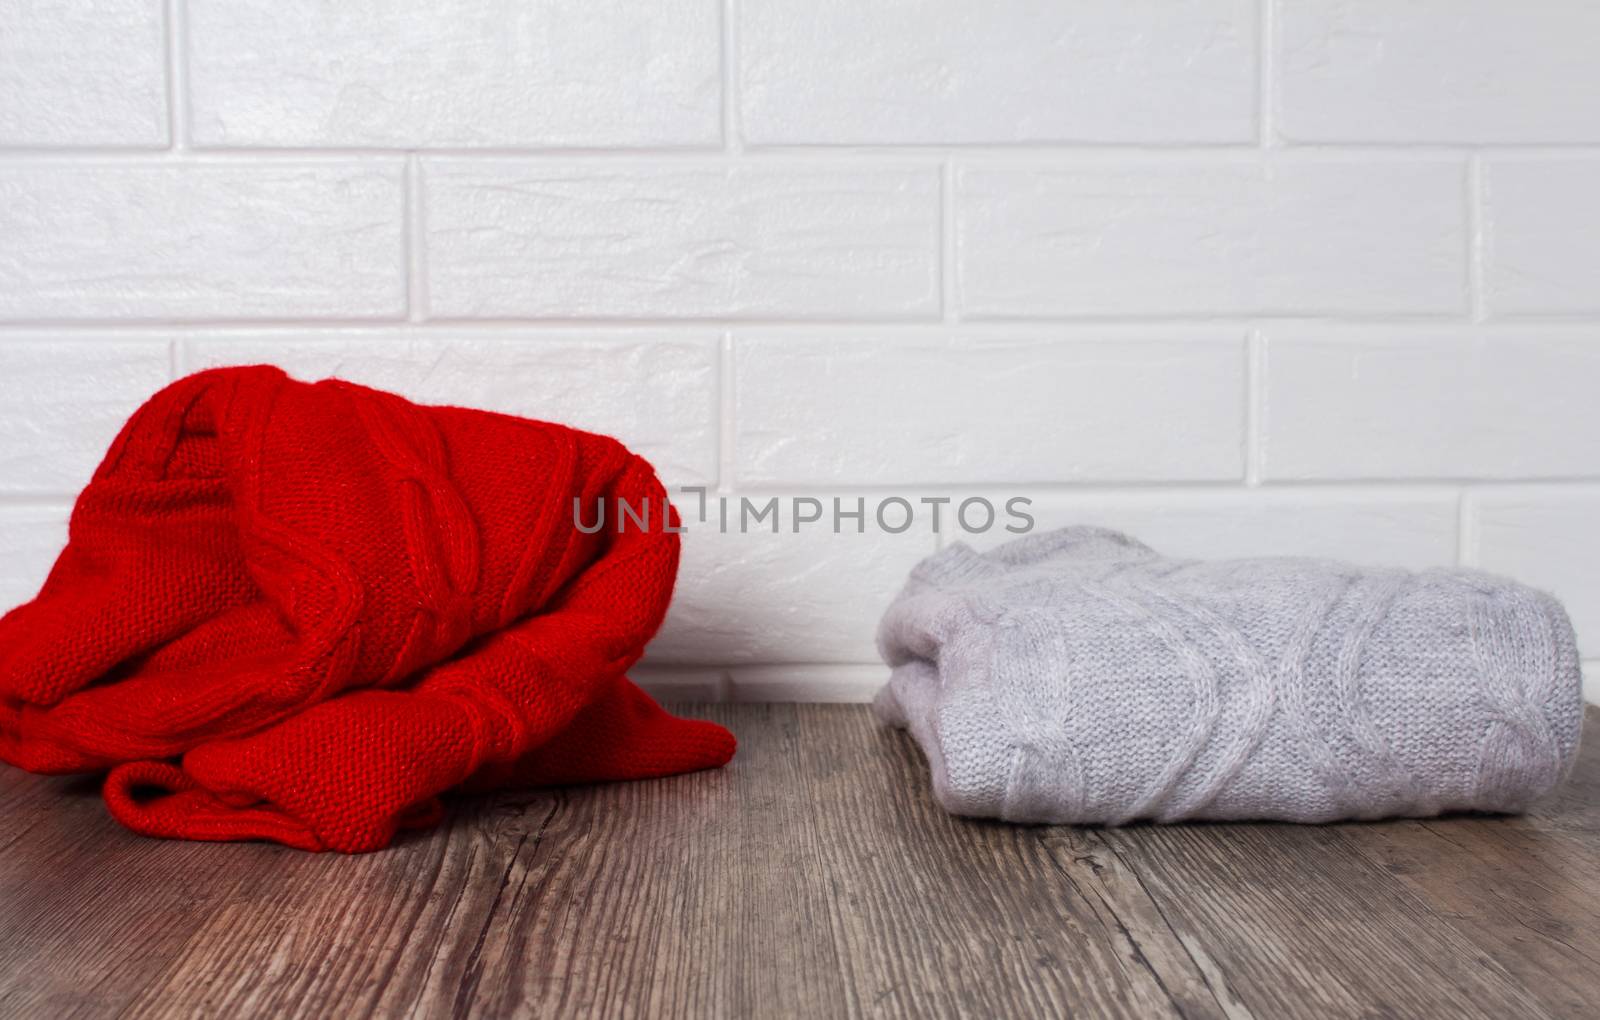 Clothing, fashion, style. Two sweaters on a wooden table. A red rumpled sweater and a melange neatly folded sweater. Order and chaos. Comfort, cleaning, home routine, storage of things.Hygge, cozy, ca